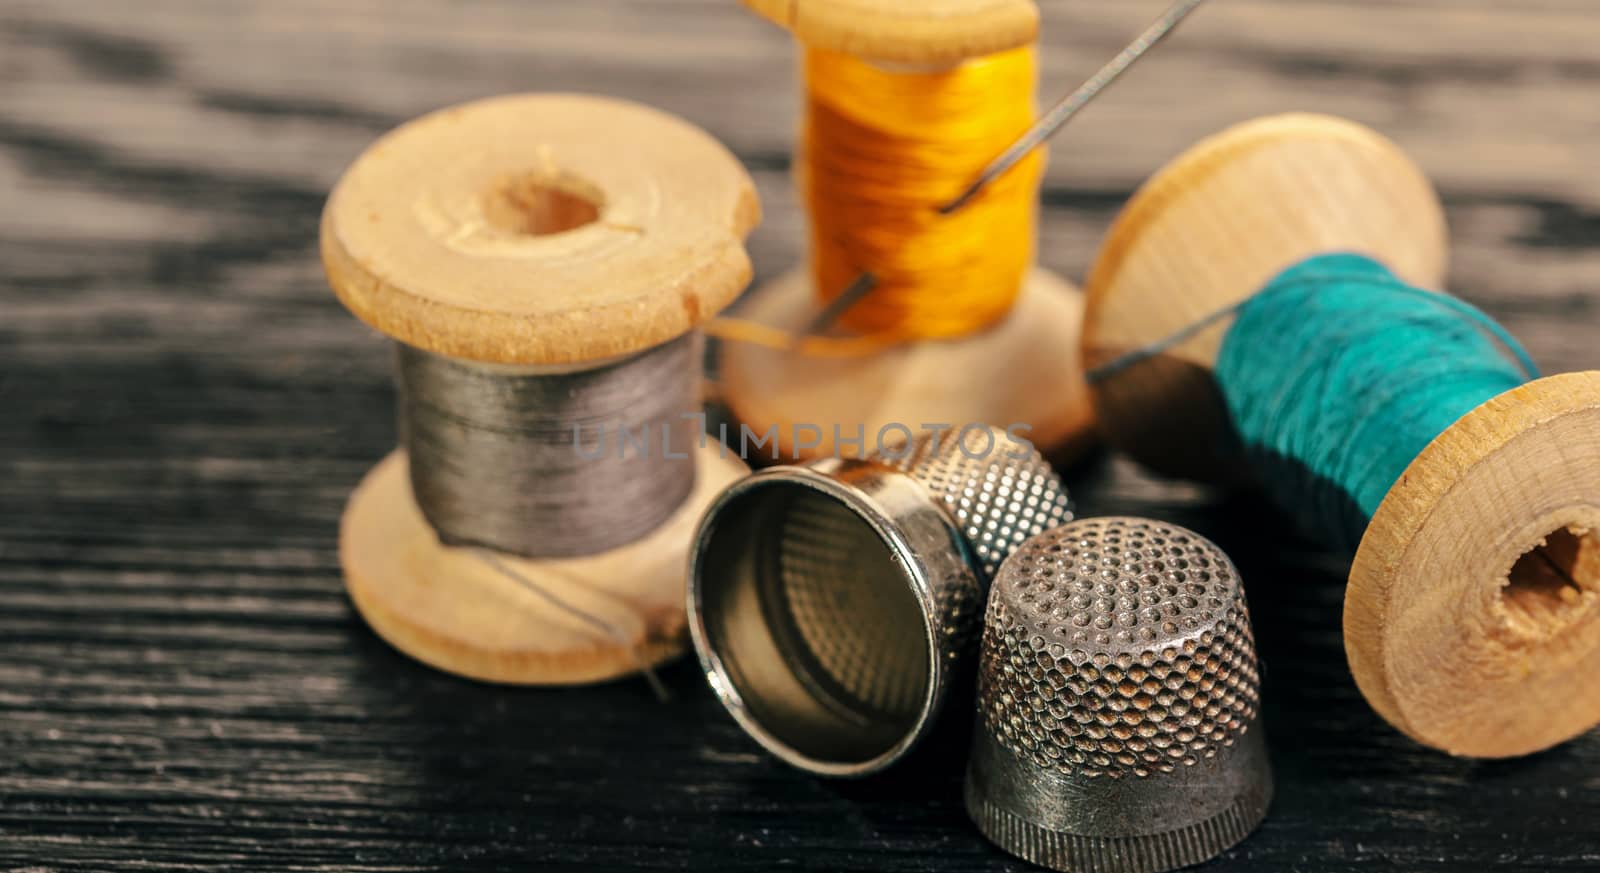 Thread and thimble  by MegaArt